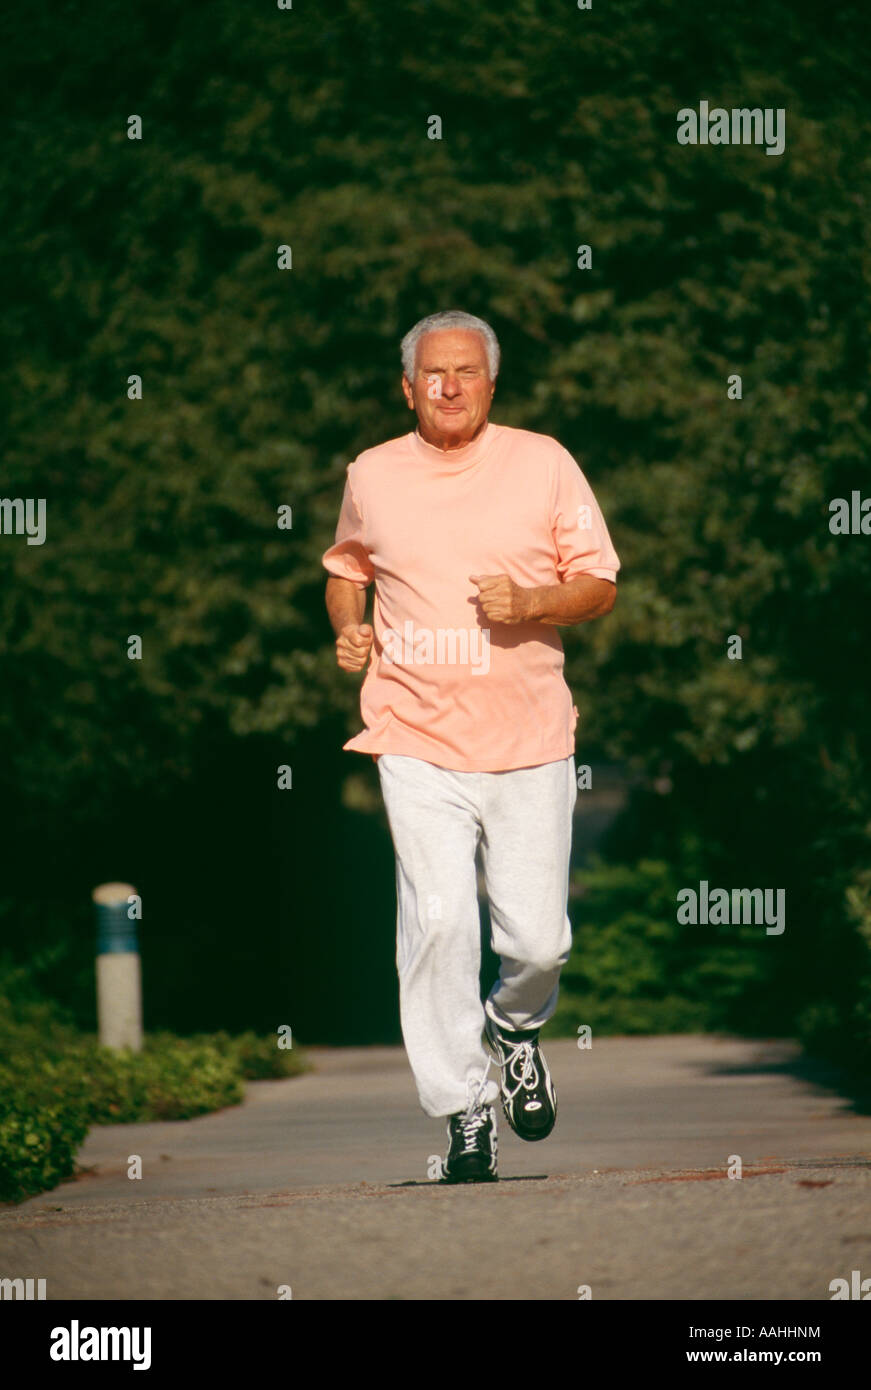 A smiling older man citizen male 73 year old running exercising exercise energy energetic in the park green copy space POV  MR Stock Photo